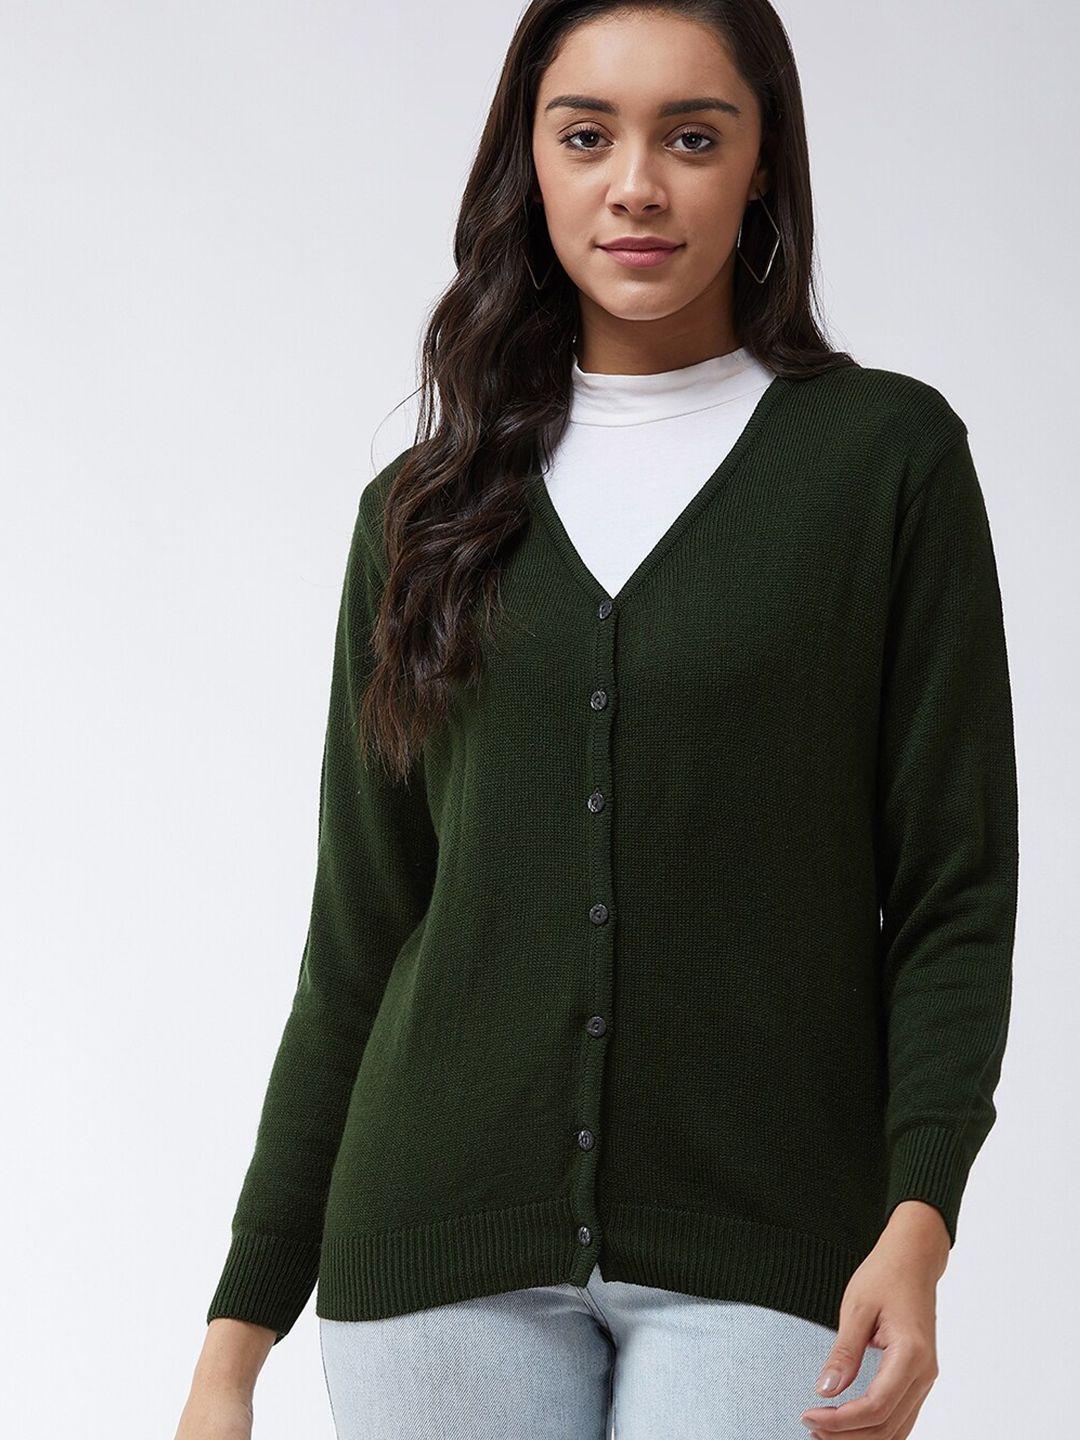 modeve women olive green solid cardigan